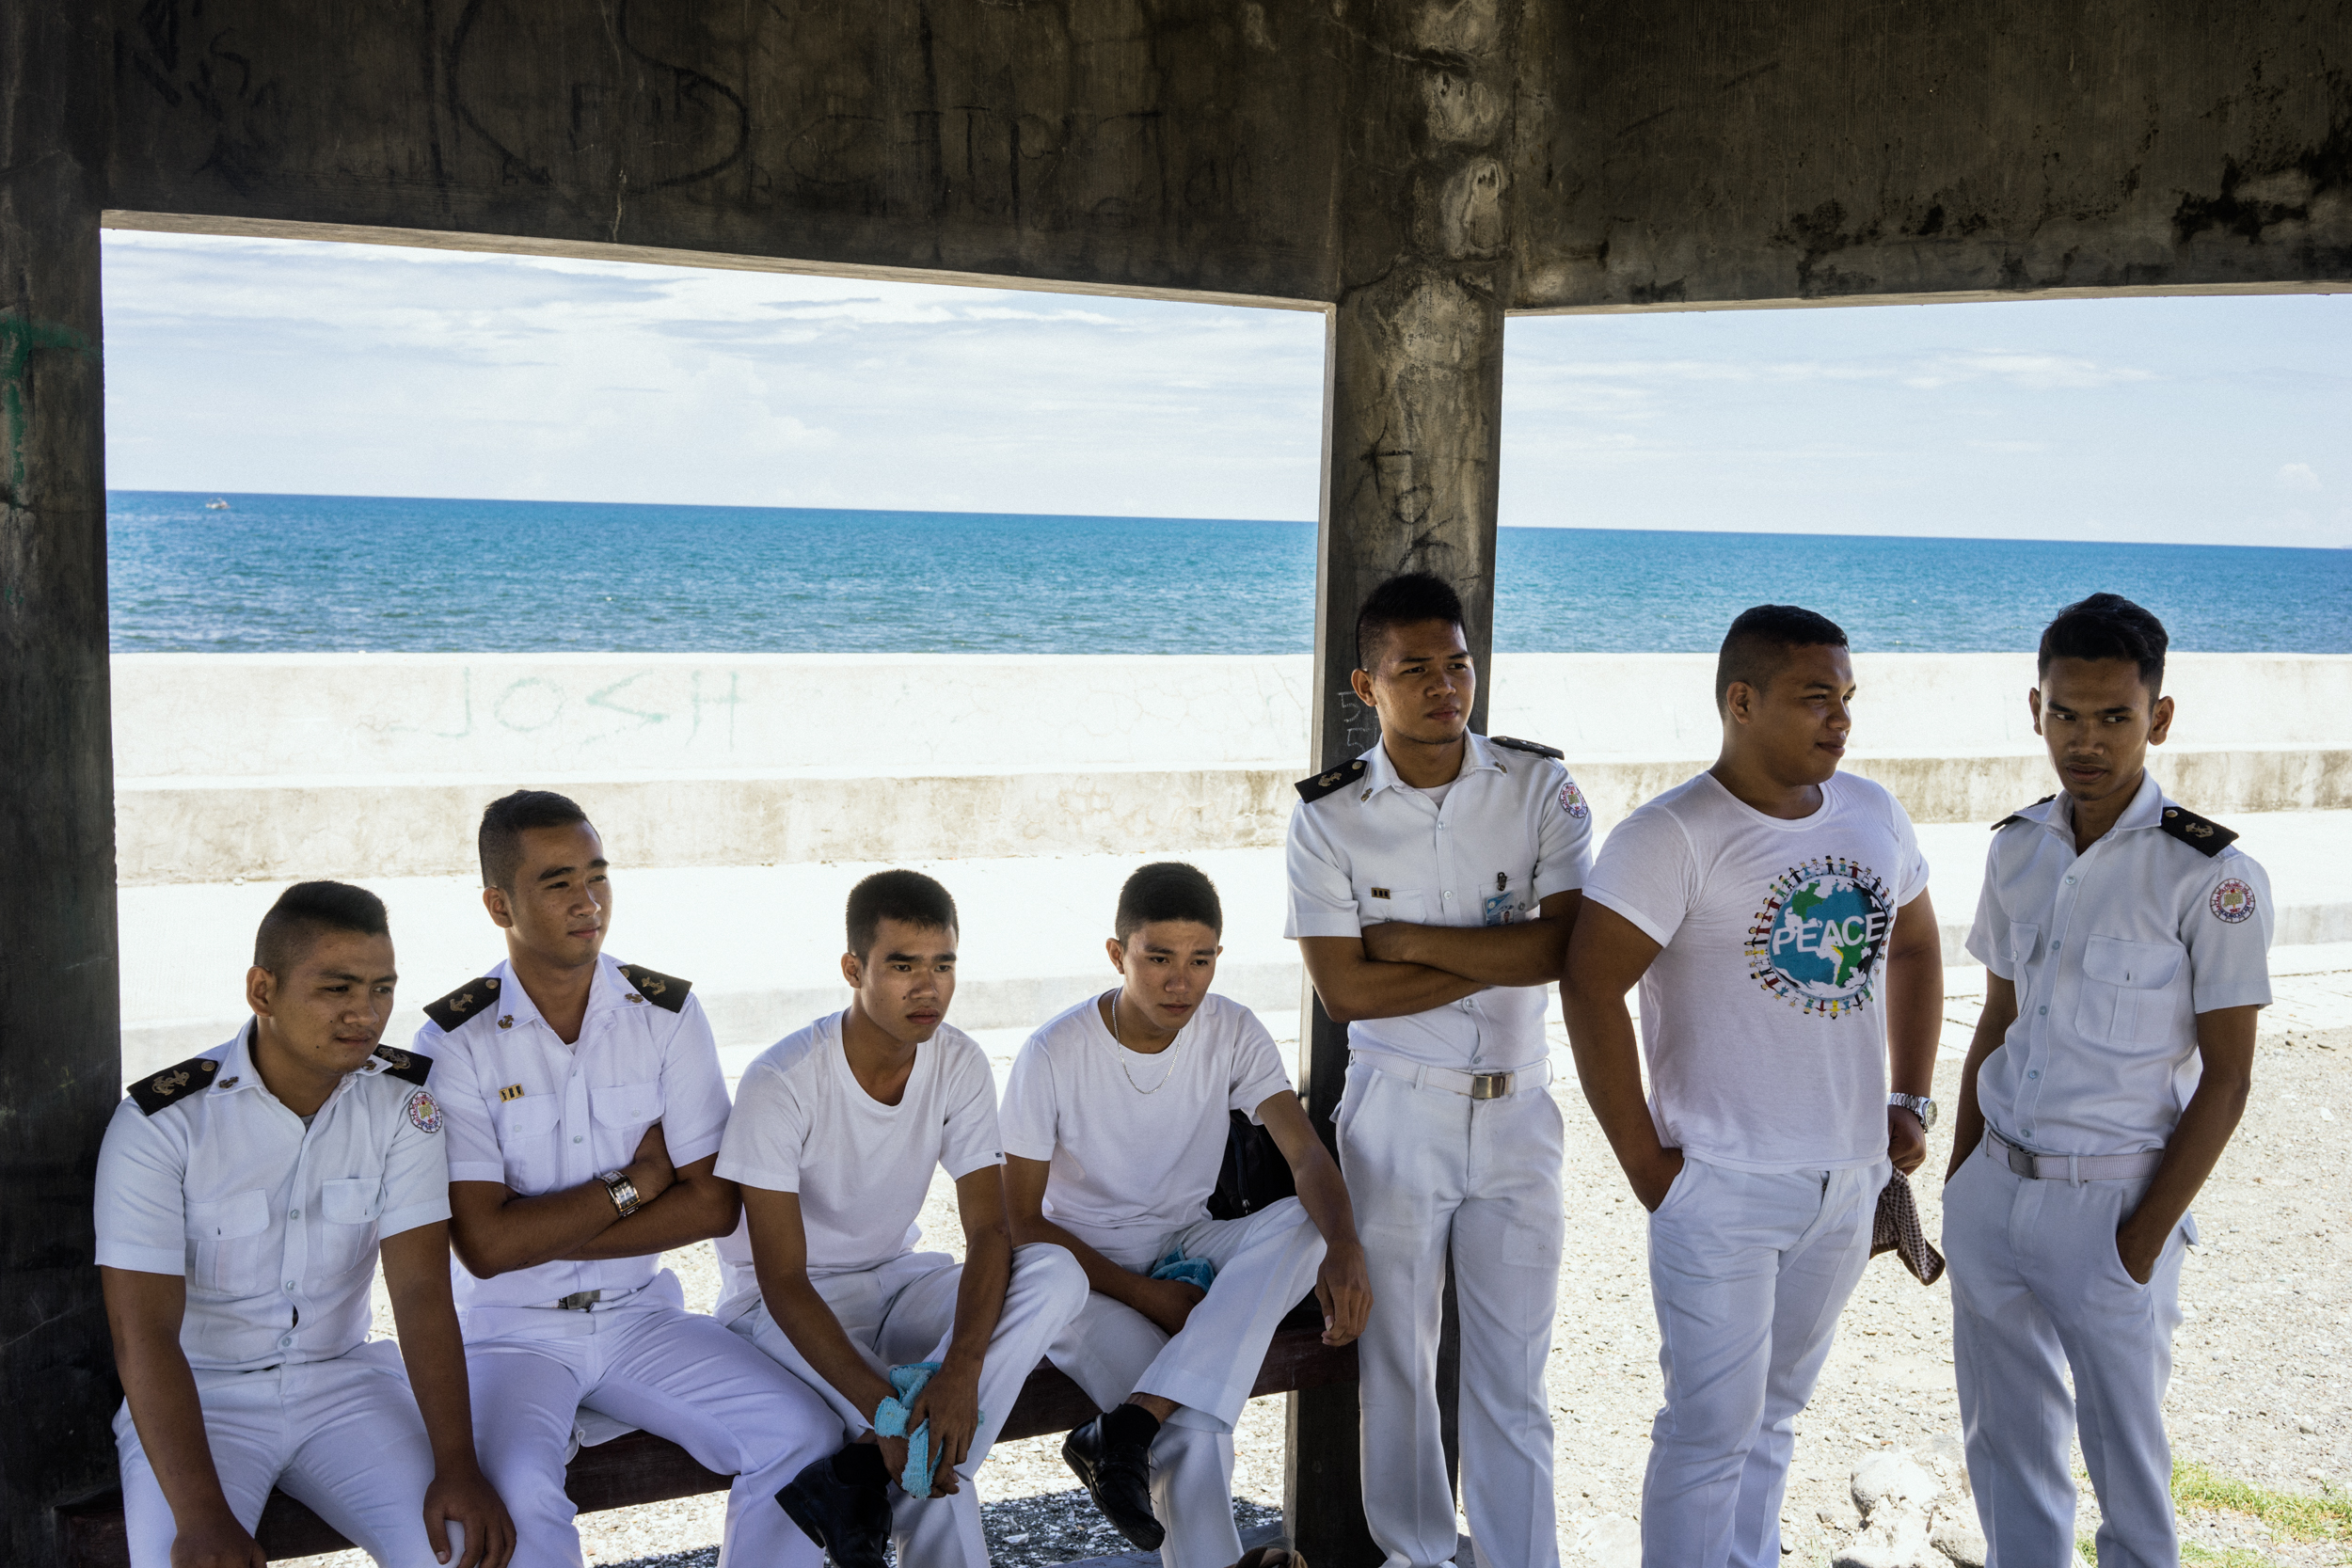  Kalibo, Philippines - September 21, 2015: Filipino students hang out near their maritime school. Seafaring is seen by many Filipino men as  a way out of poverty. Hannah Reyes 